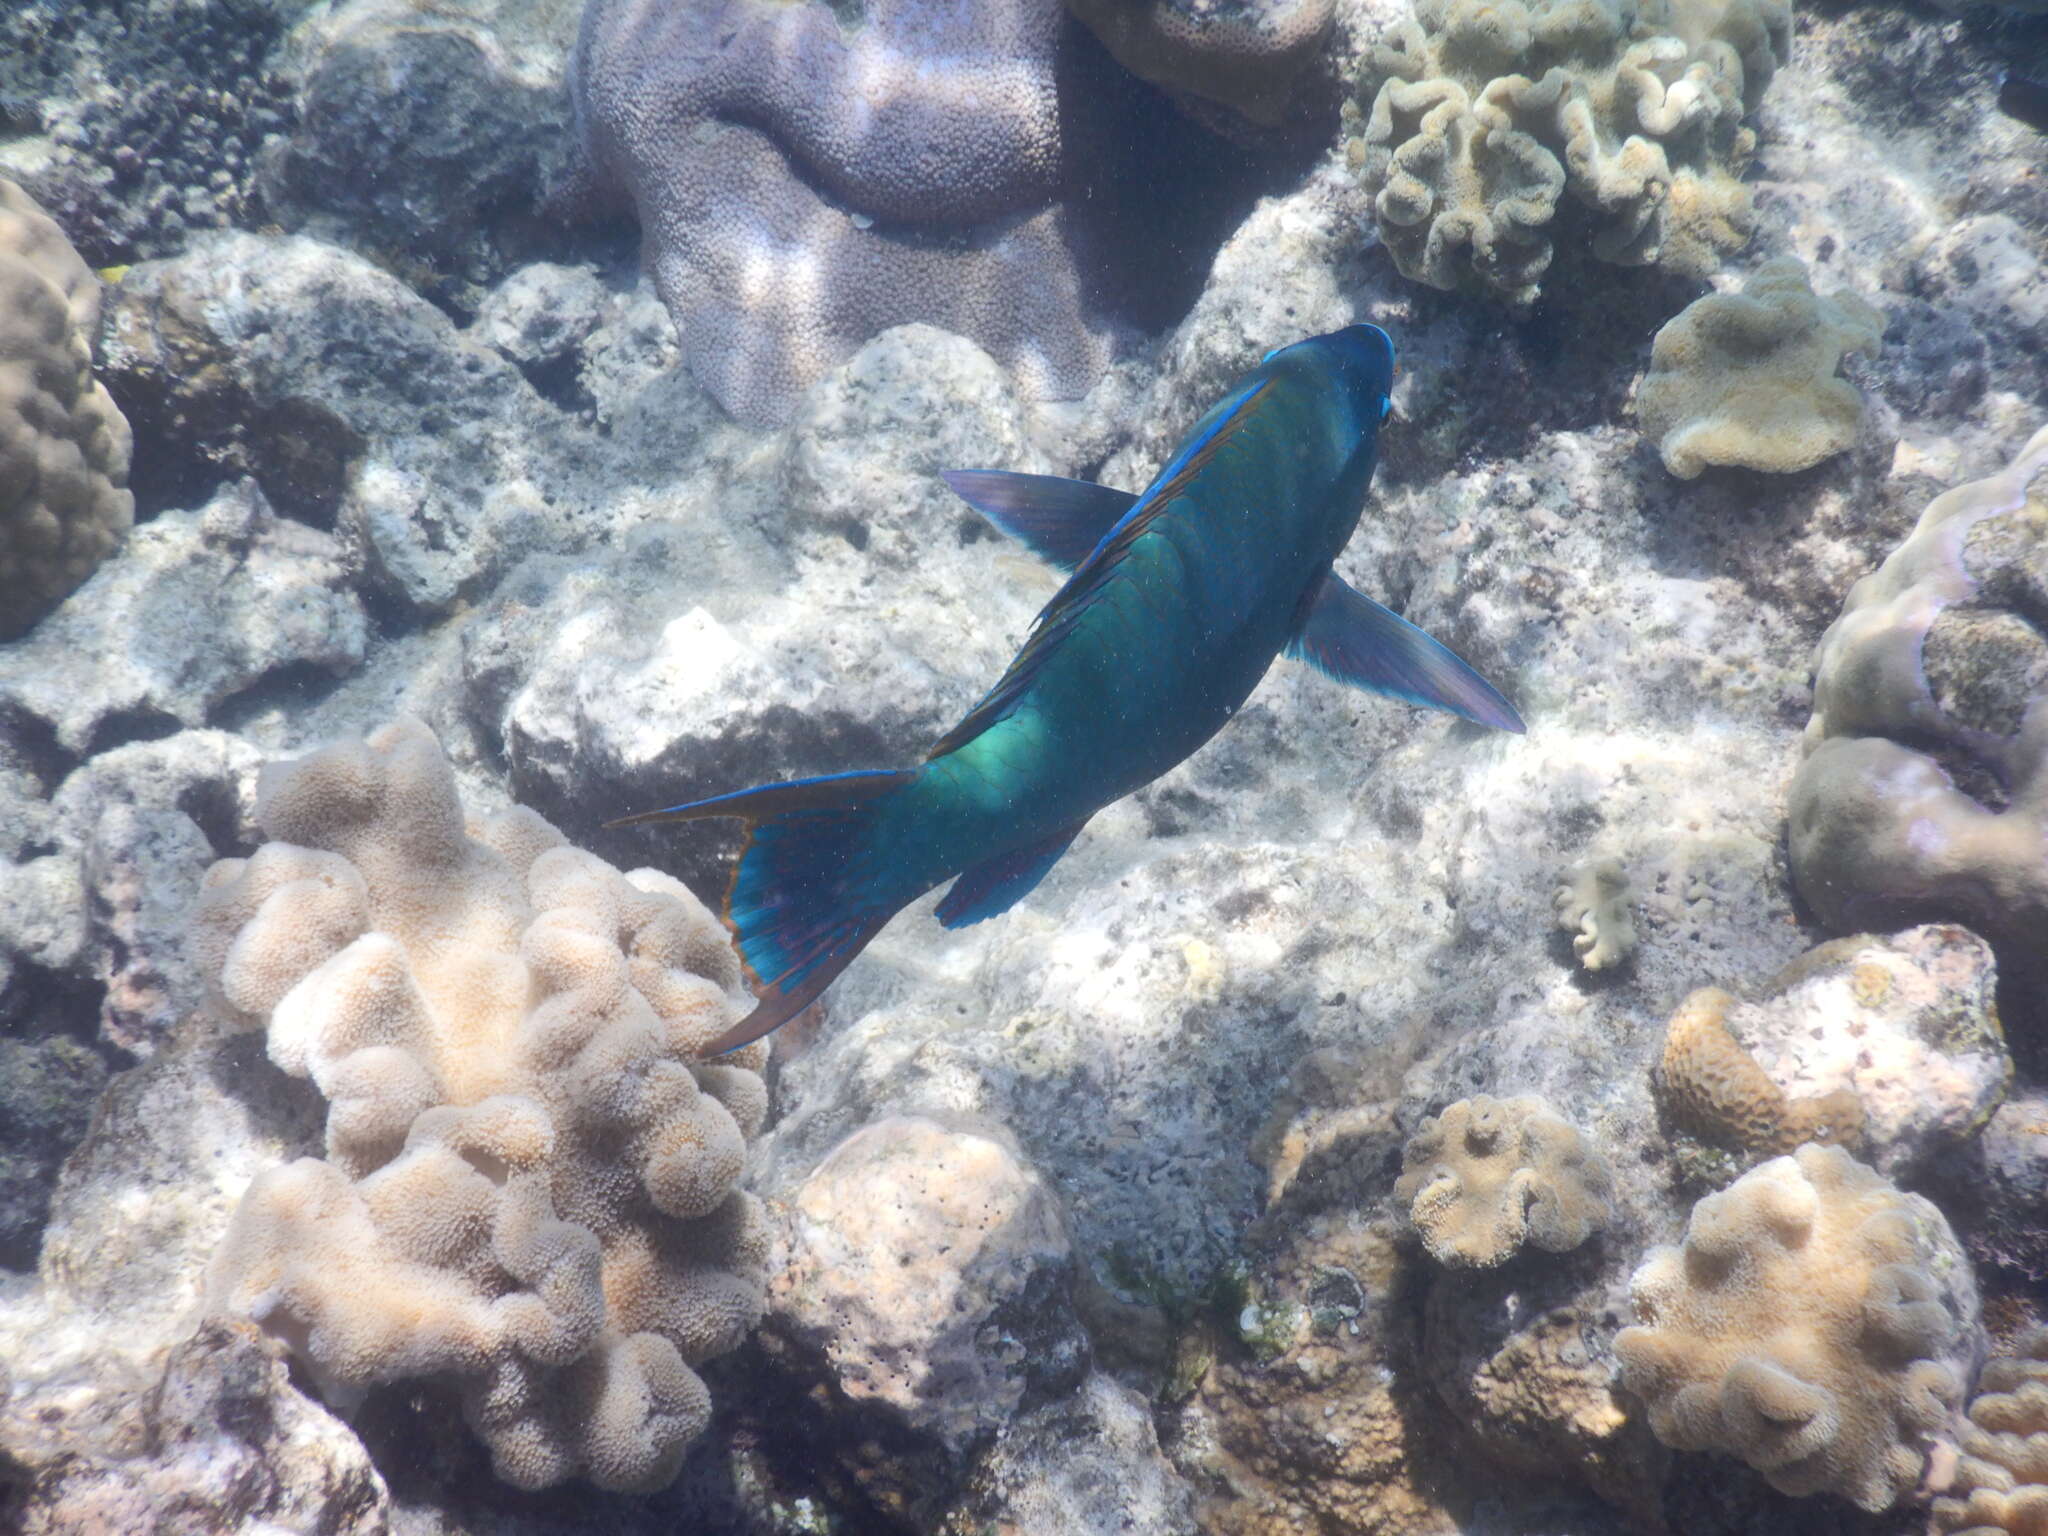 Image of Filament-finned Parrotfish